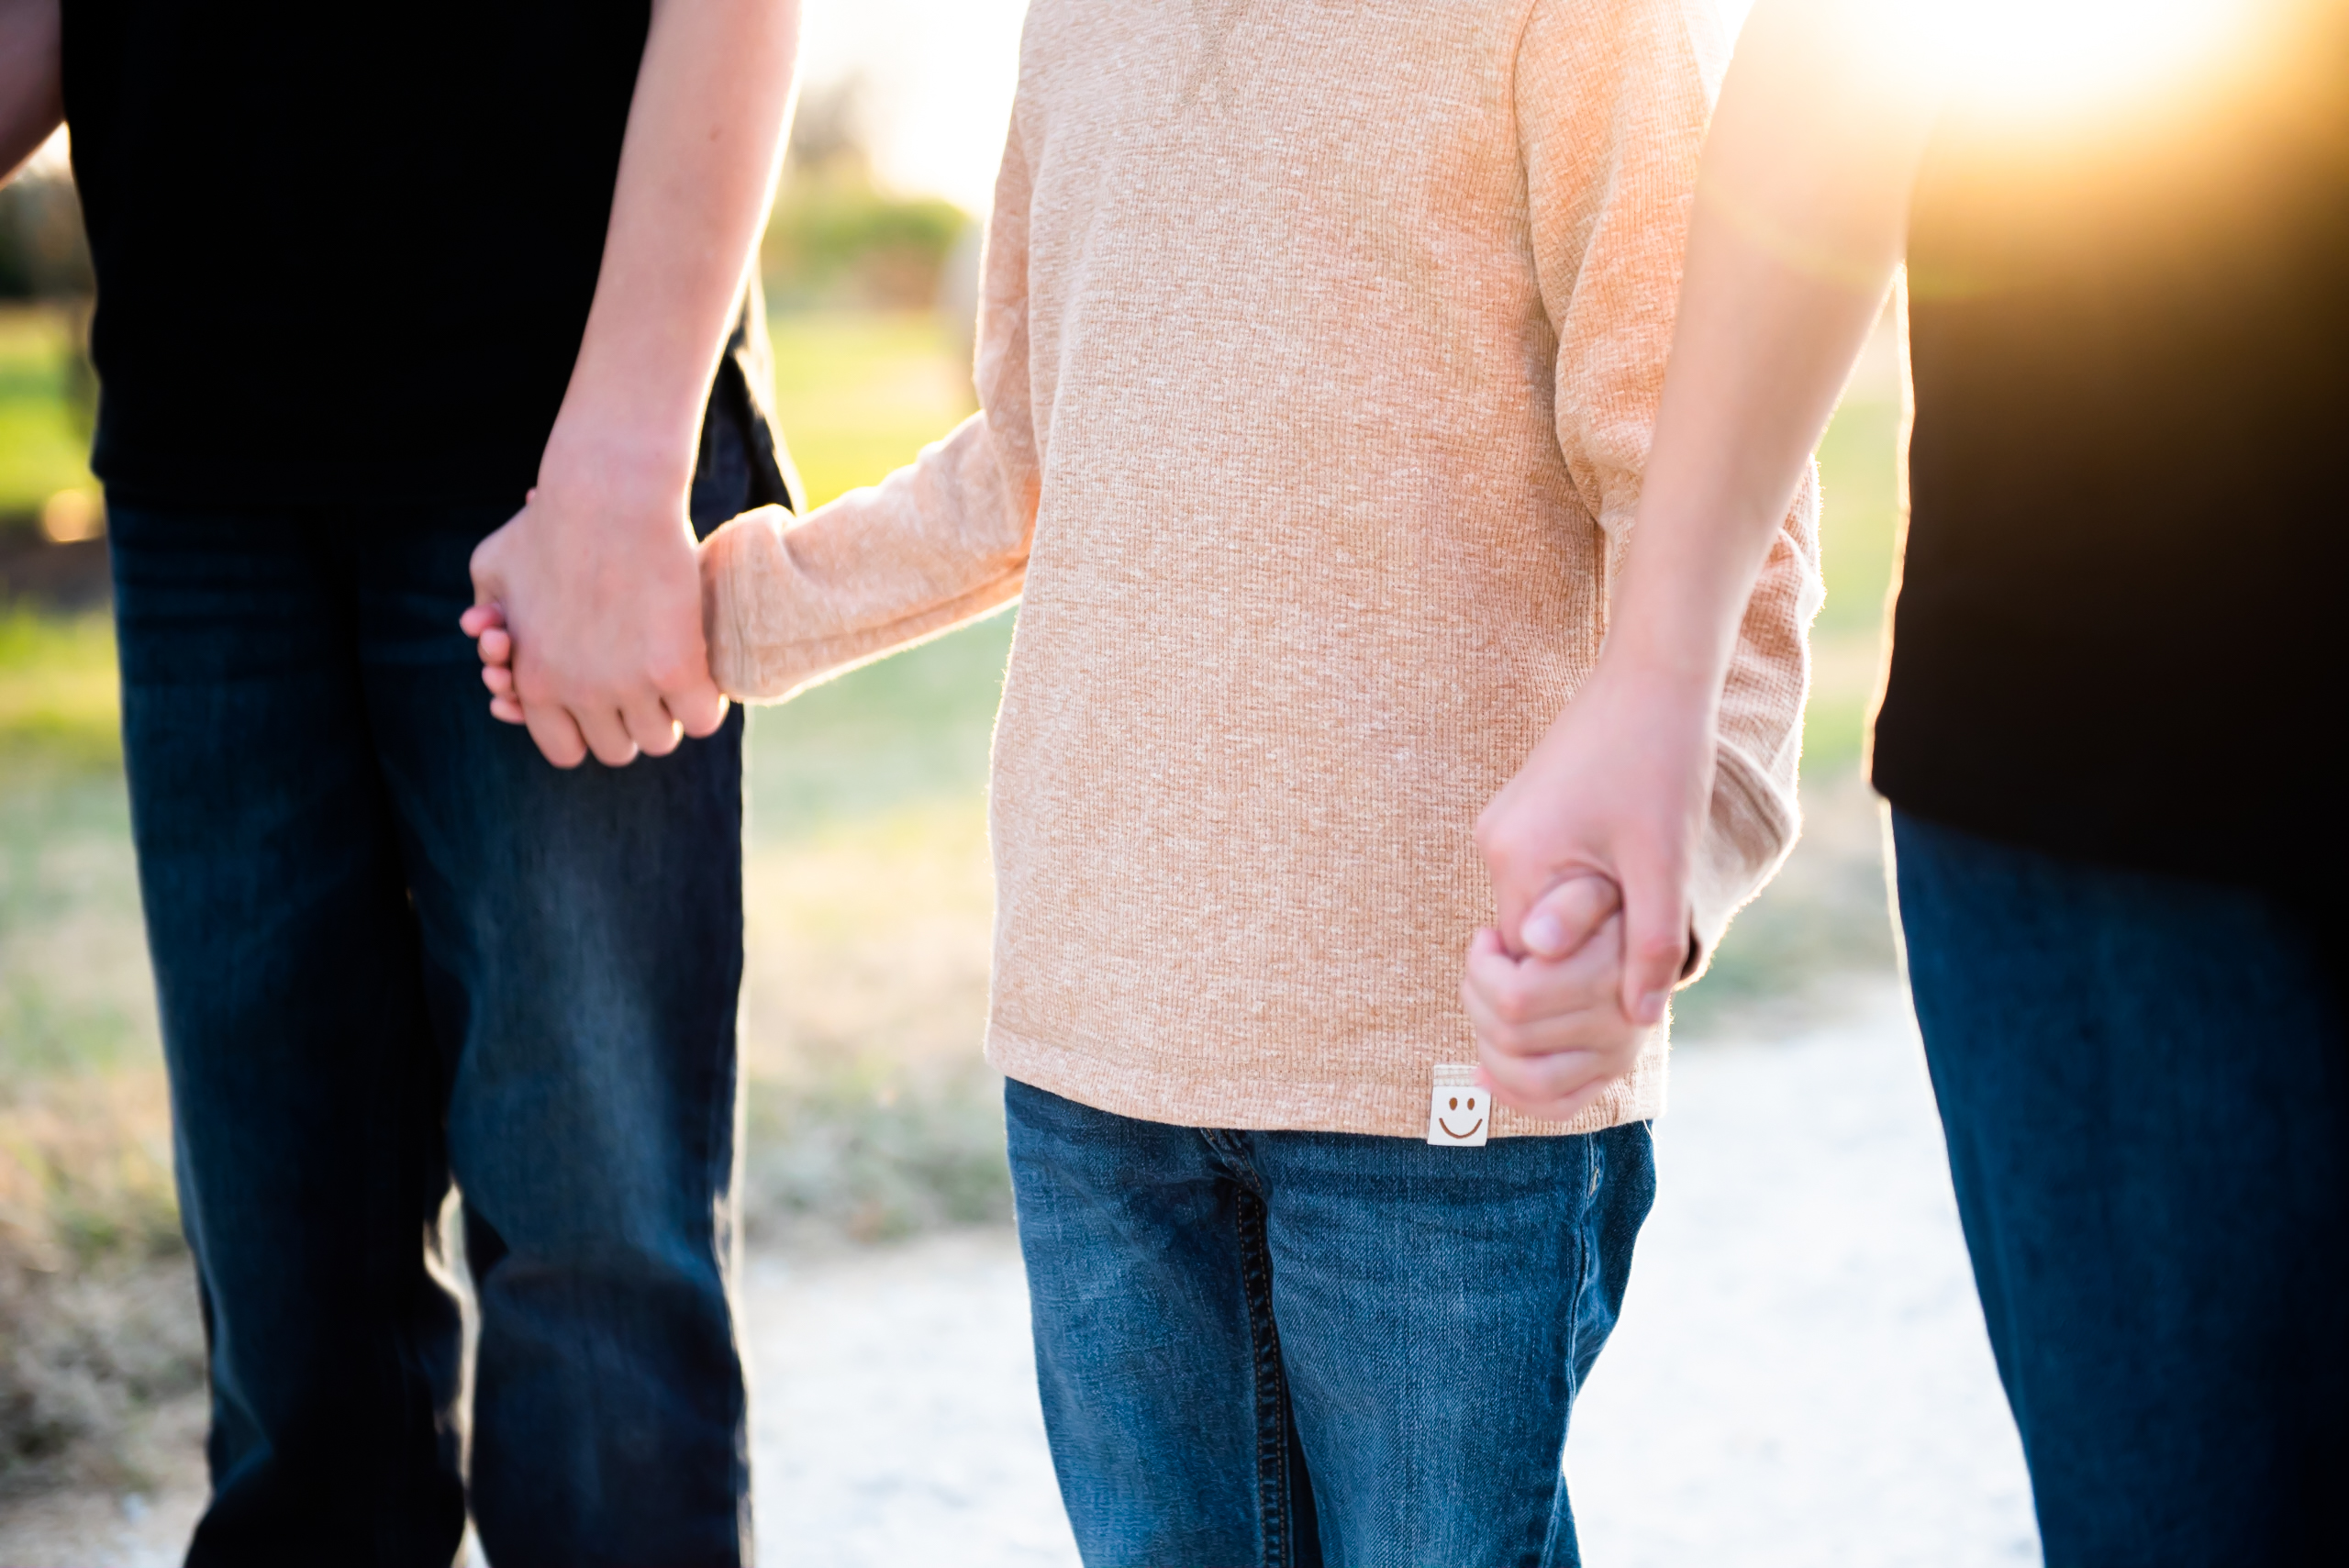 a child between parents, holding their hands. You only see neck down.